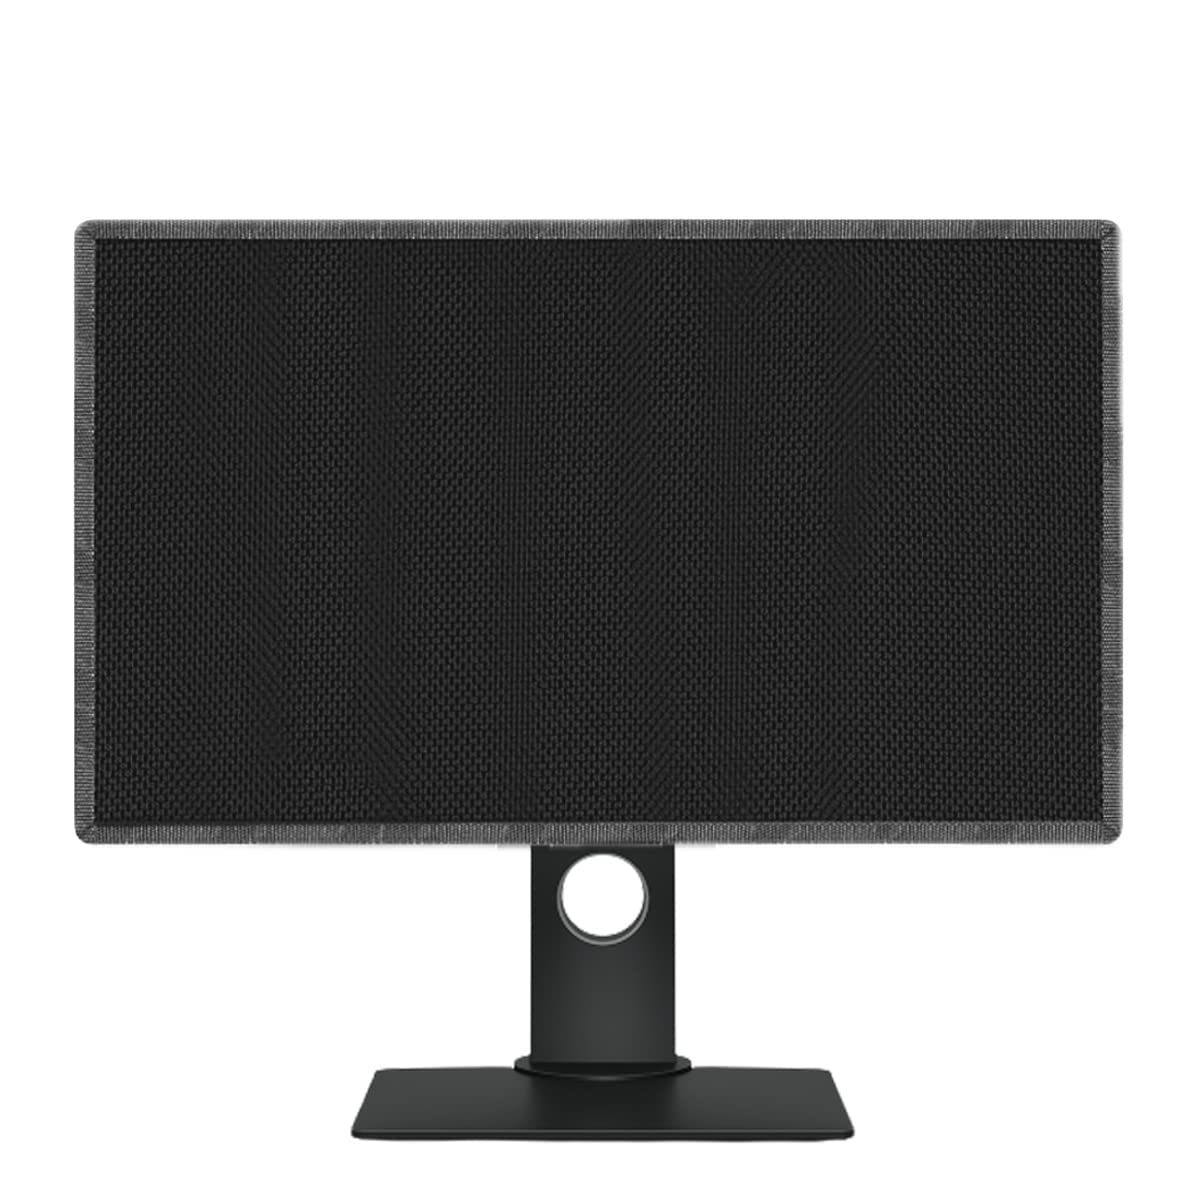 PalaP Super Premium Dust Proof Monitor Cover for LG 25 inches Monitor (Black)